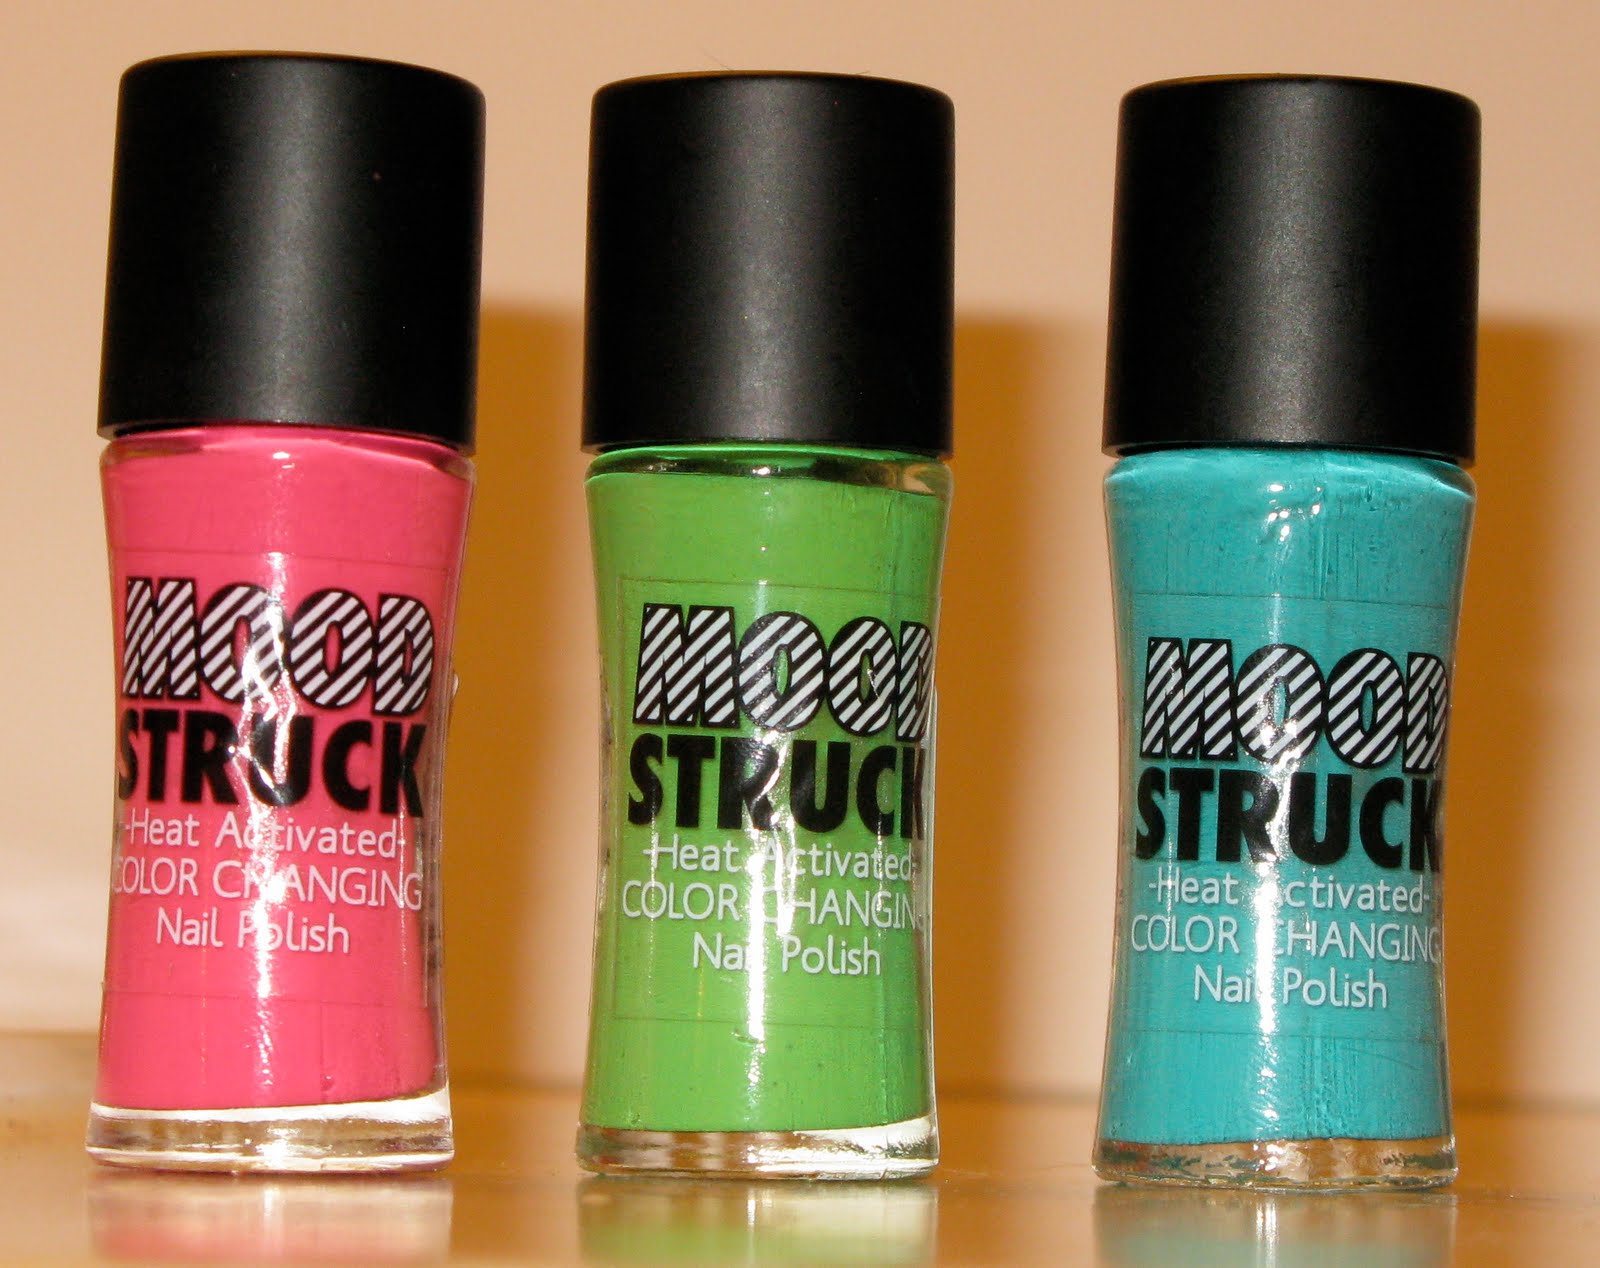 9. Sinful Colors Color Changing Nail Polish - wide 9